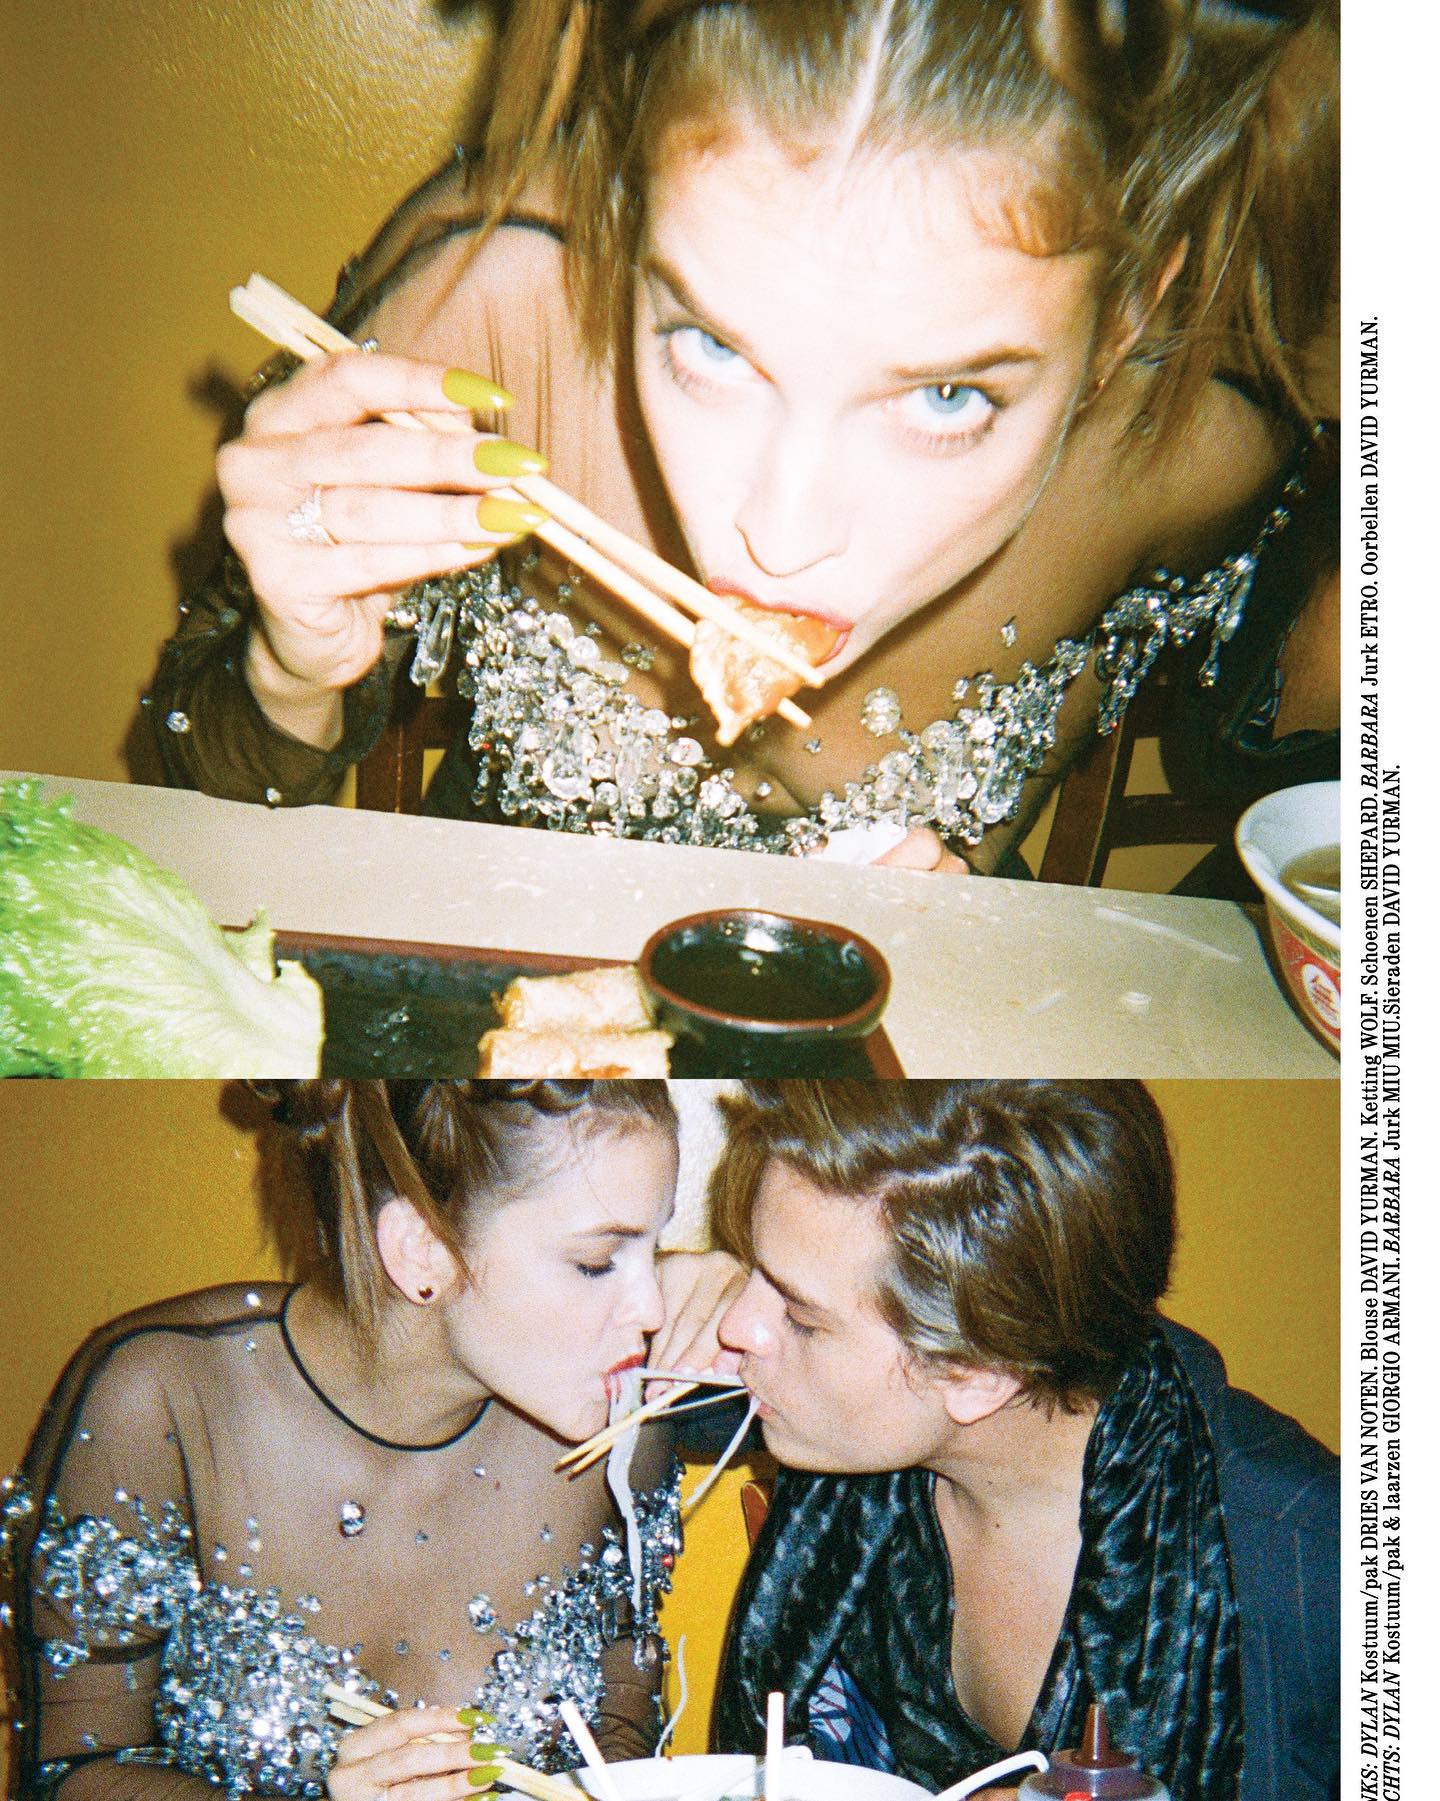 Photos n°14 : Barbara Palvin and Dylan Sprouse Hit the Cover!